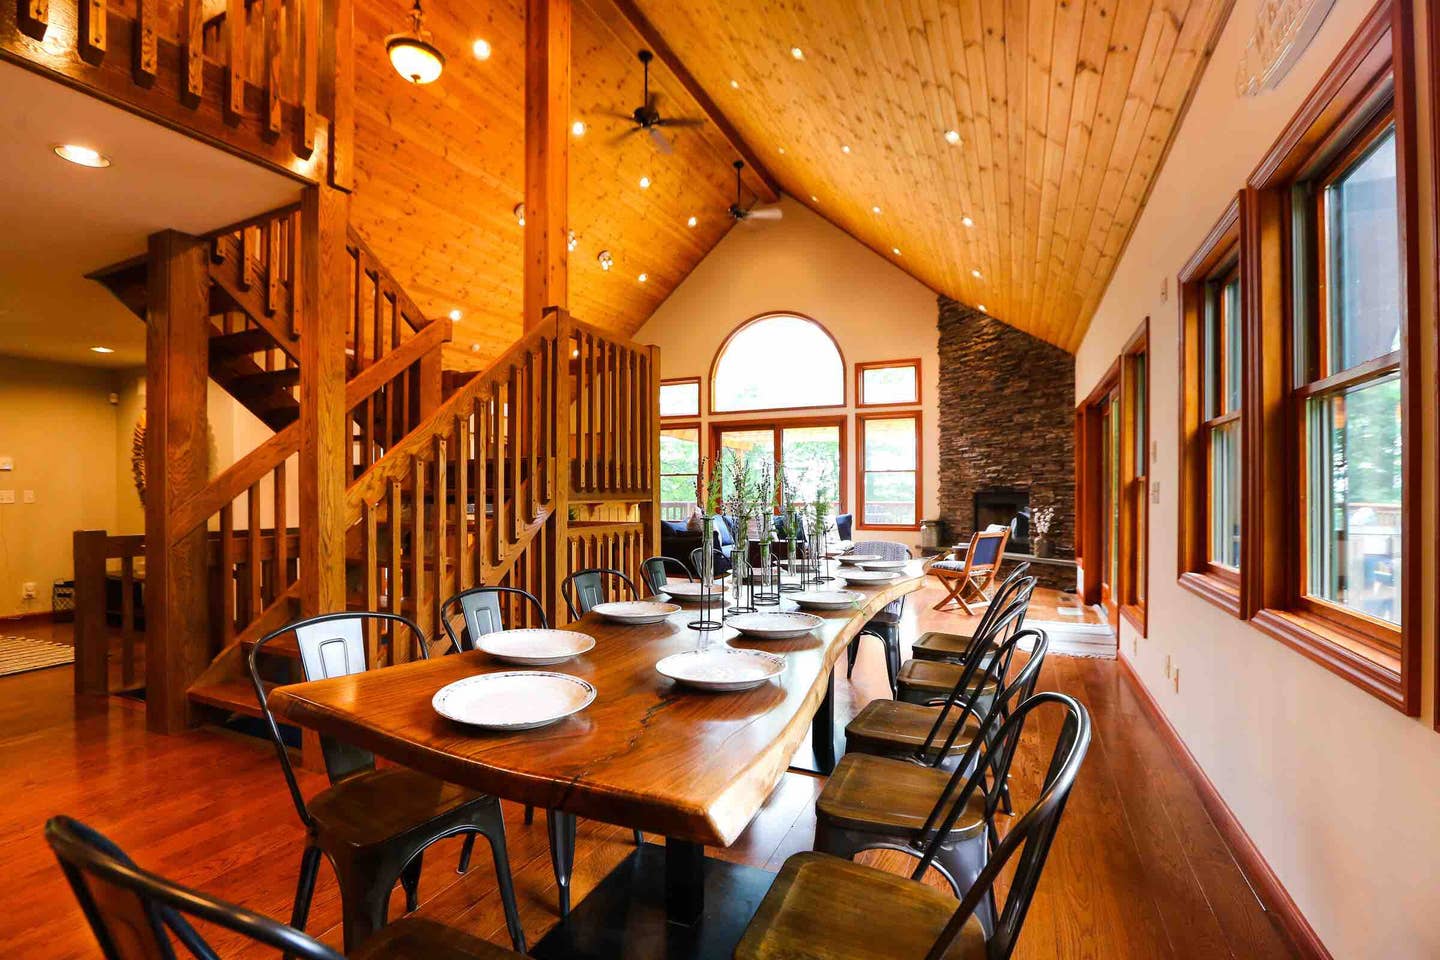 Where To Stay in West Catskills NY - Hirsch Manor luxurious cabin in the forest